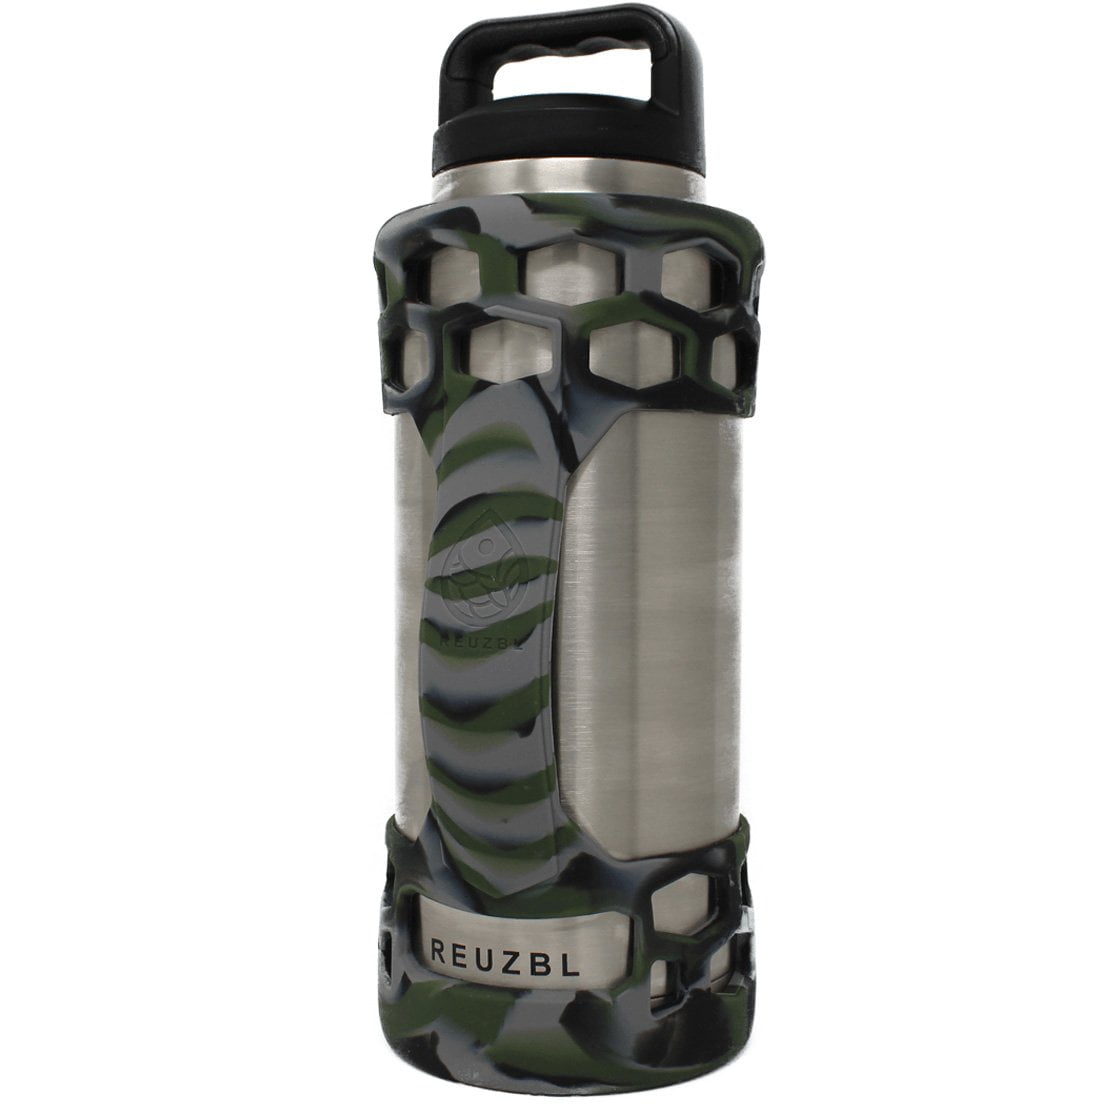 Bottle Bumper Silicone Sleeve Protector with Handle for Yeti